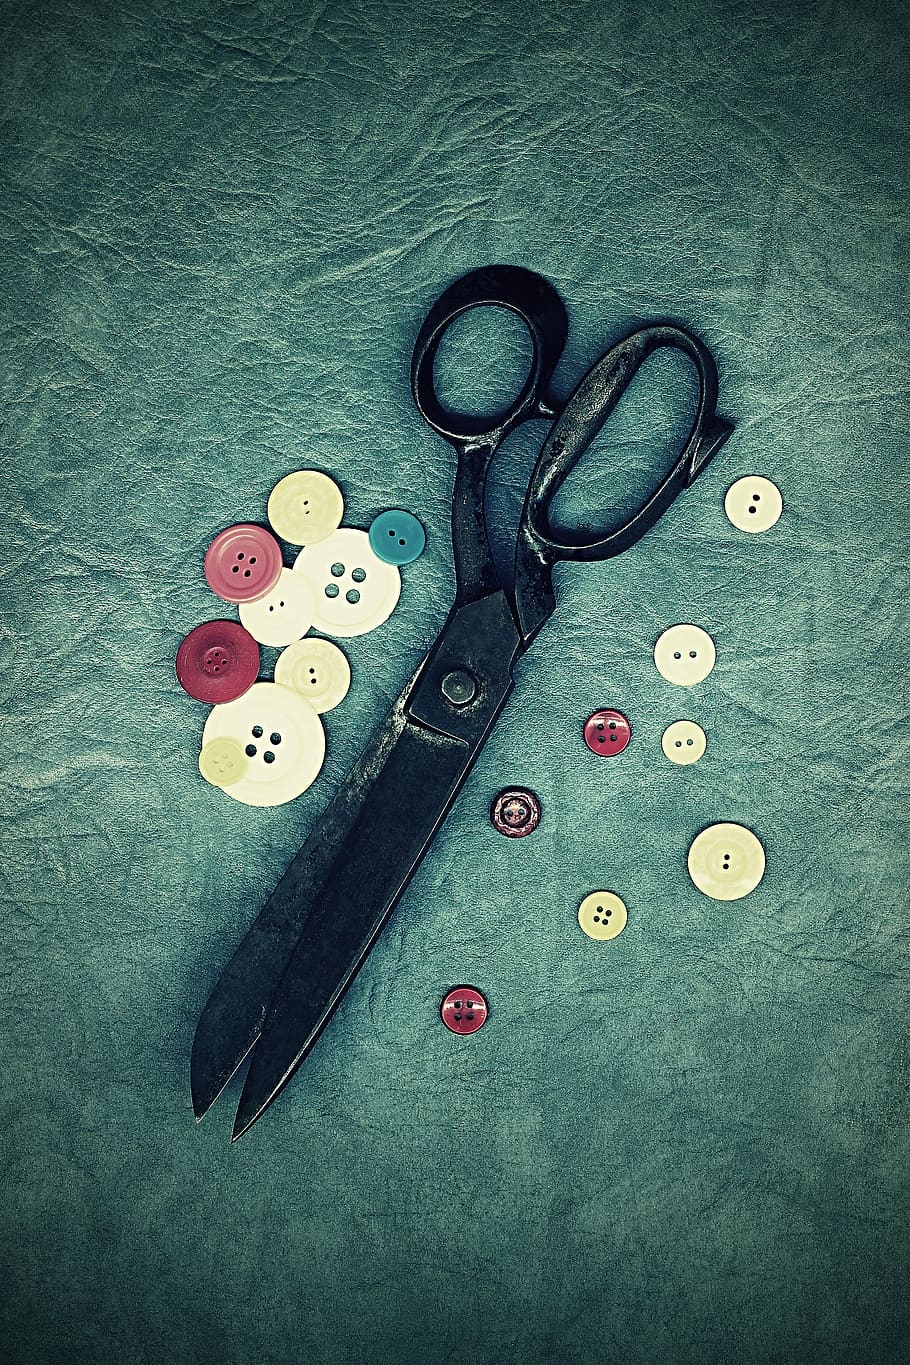 scissors, old, sewing, on peace, work, dress, haute, background, textile, tool